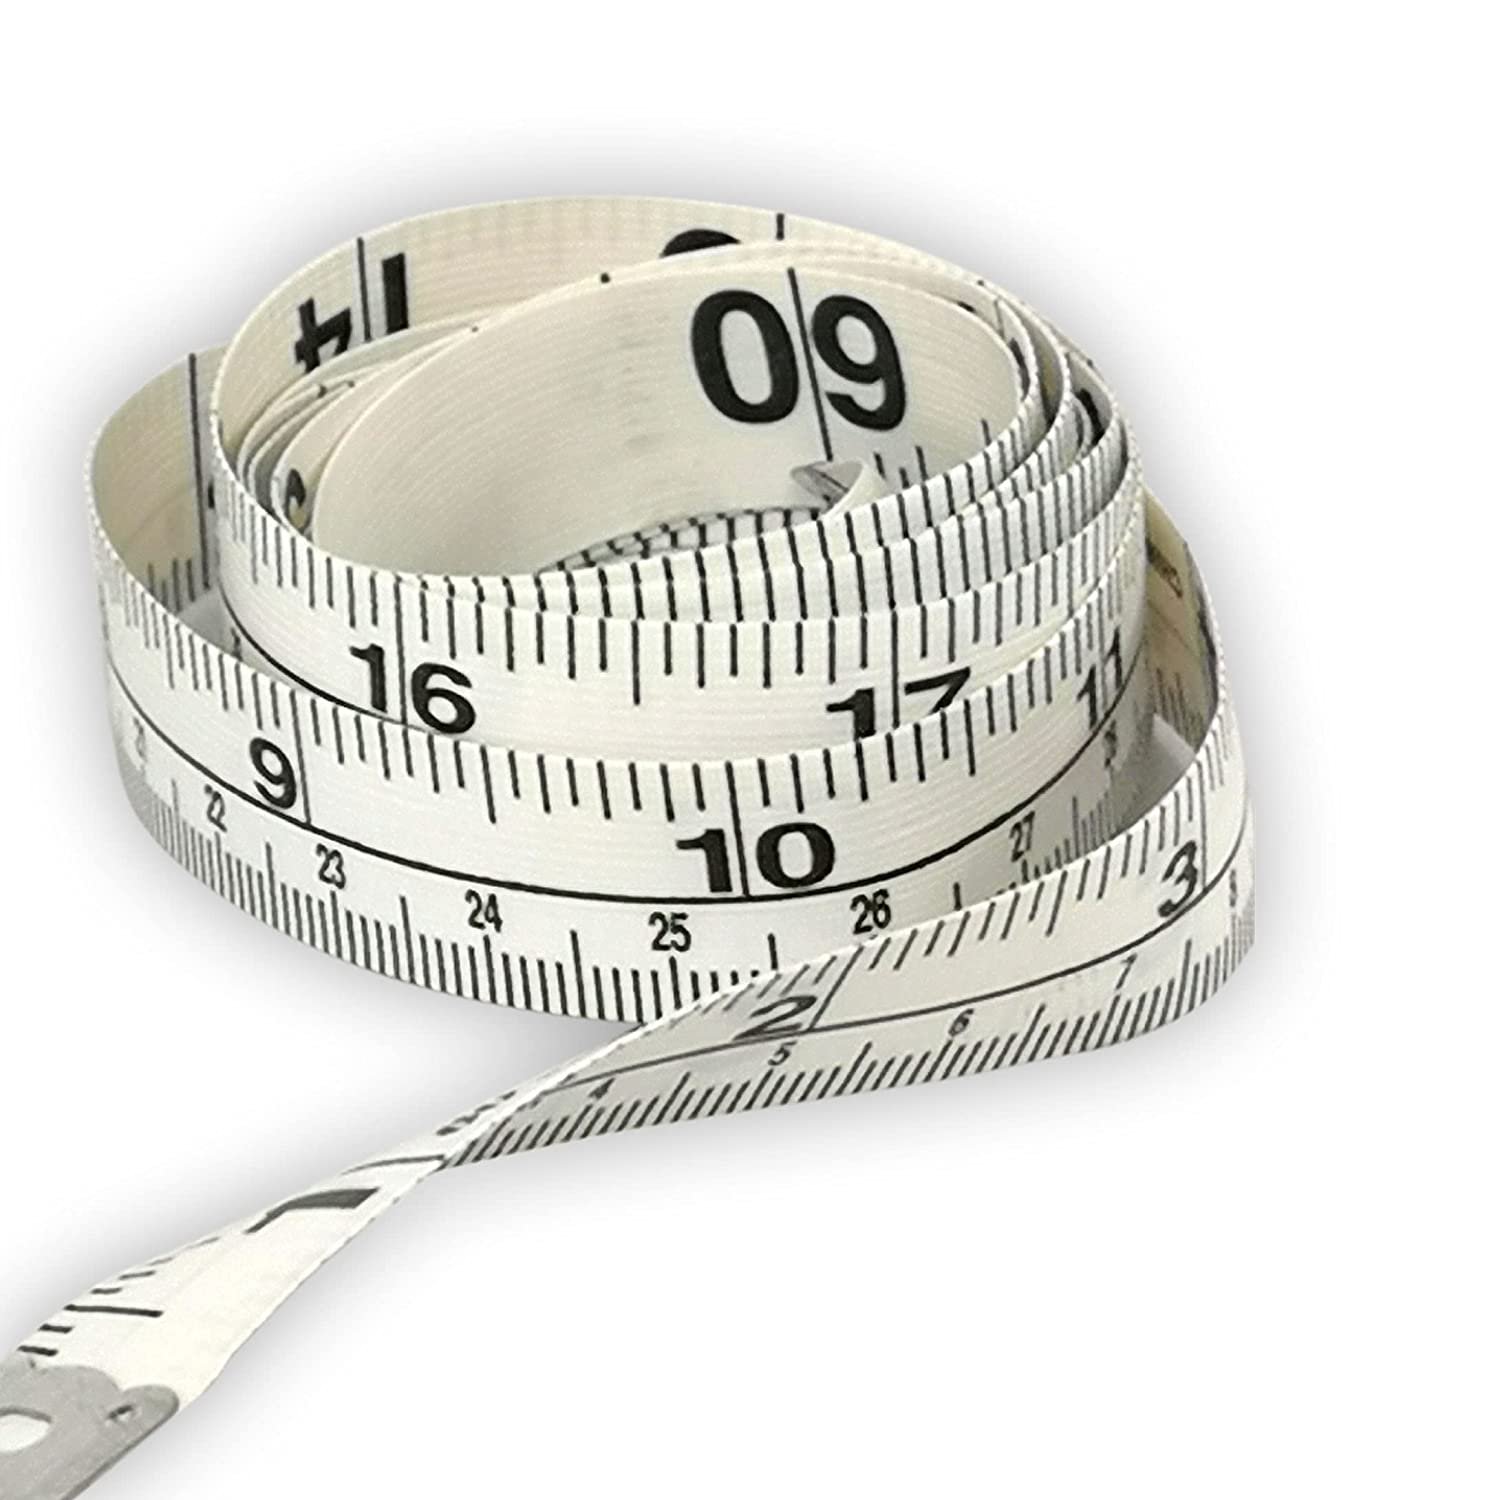 Soft Tape Measure Double Scale Body Sewing Flexible Ruler for Weight Loss